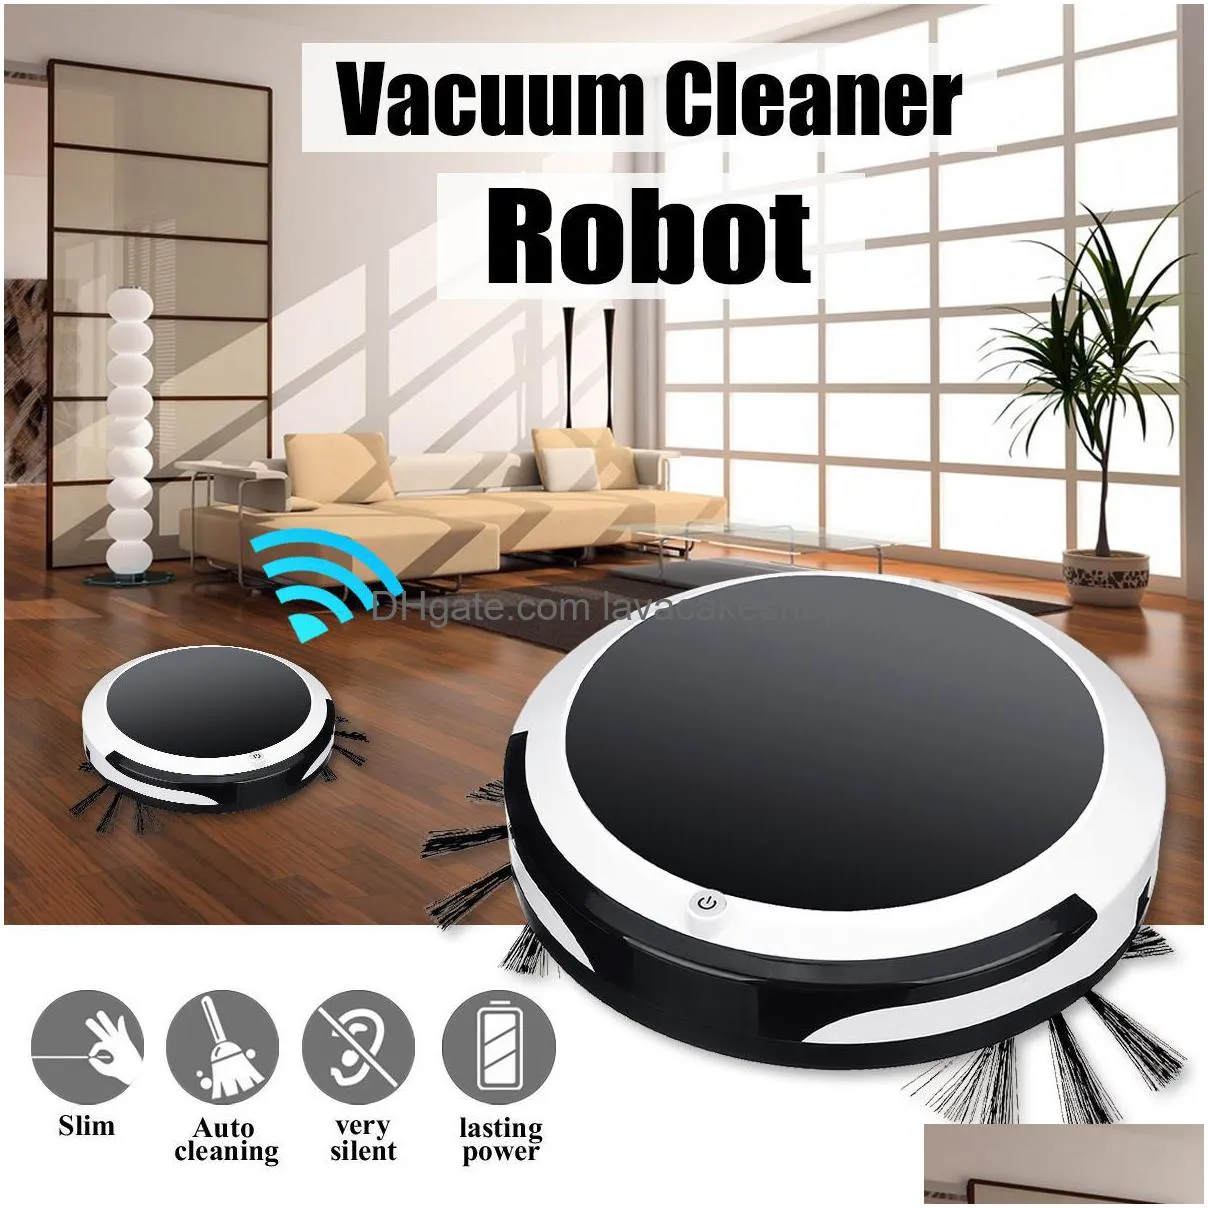 Vacuums 3in1 Smart Robot Vacuum Cleamer для домашнего офиса Swee Swee Swee Suctic Drag Hine 1200pa Wet Dry Drop Delive Gardenkee или Dh9fg